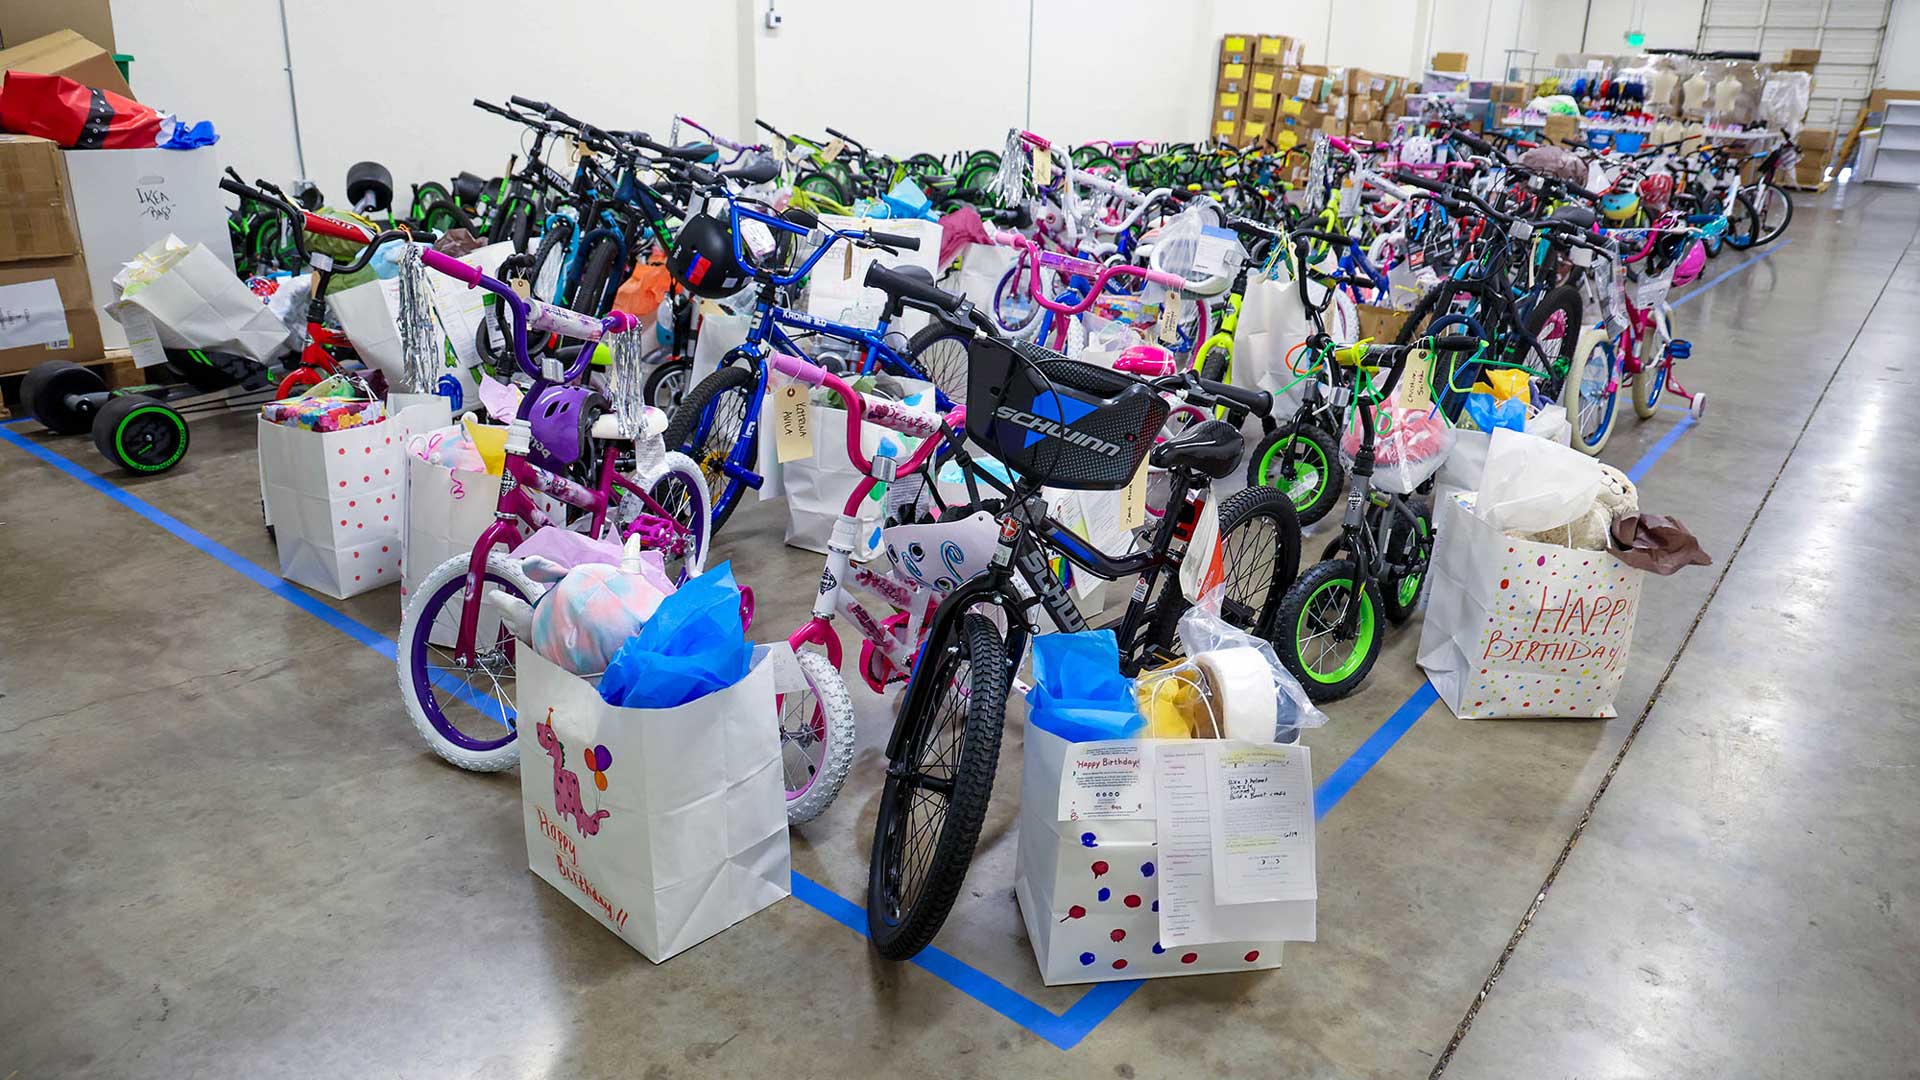 Arizona Helping Hands provides birthday gifts to foster children across the state. The gifts can include bikes, clothes, toys, books, and other goodies. 